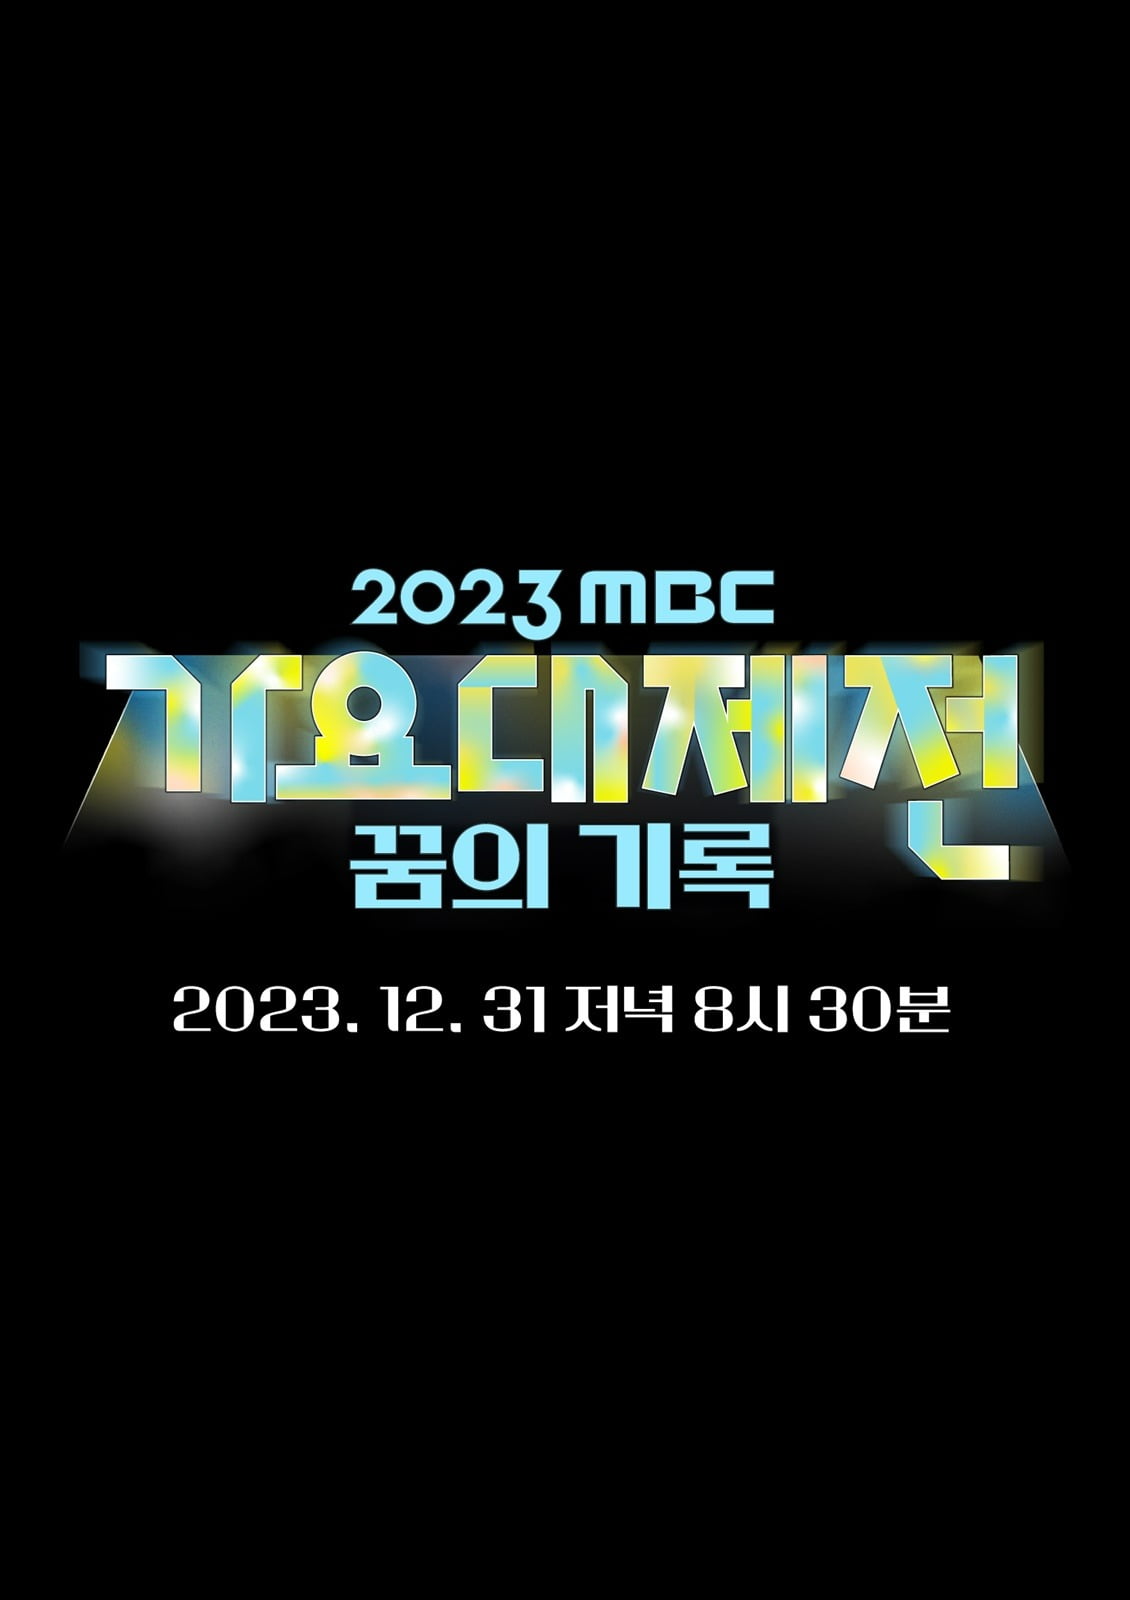 We looked at the highlights of the ‘2023 MBC Song Festival’.